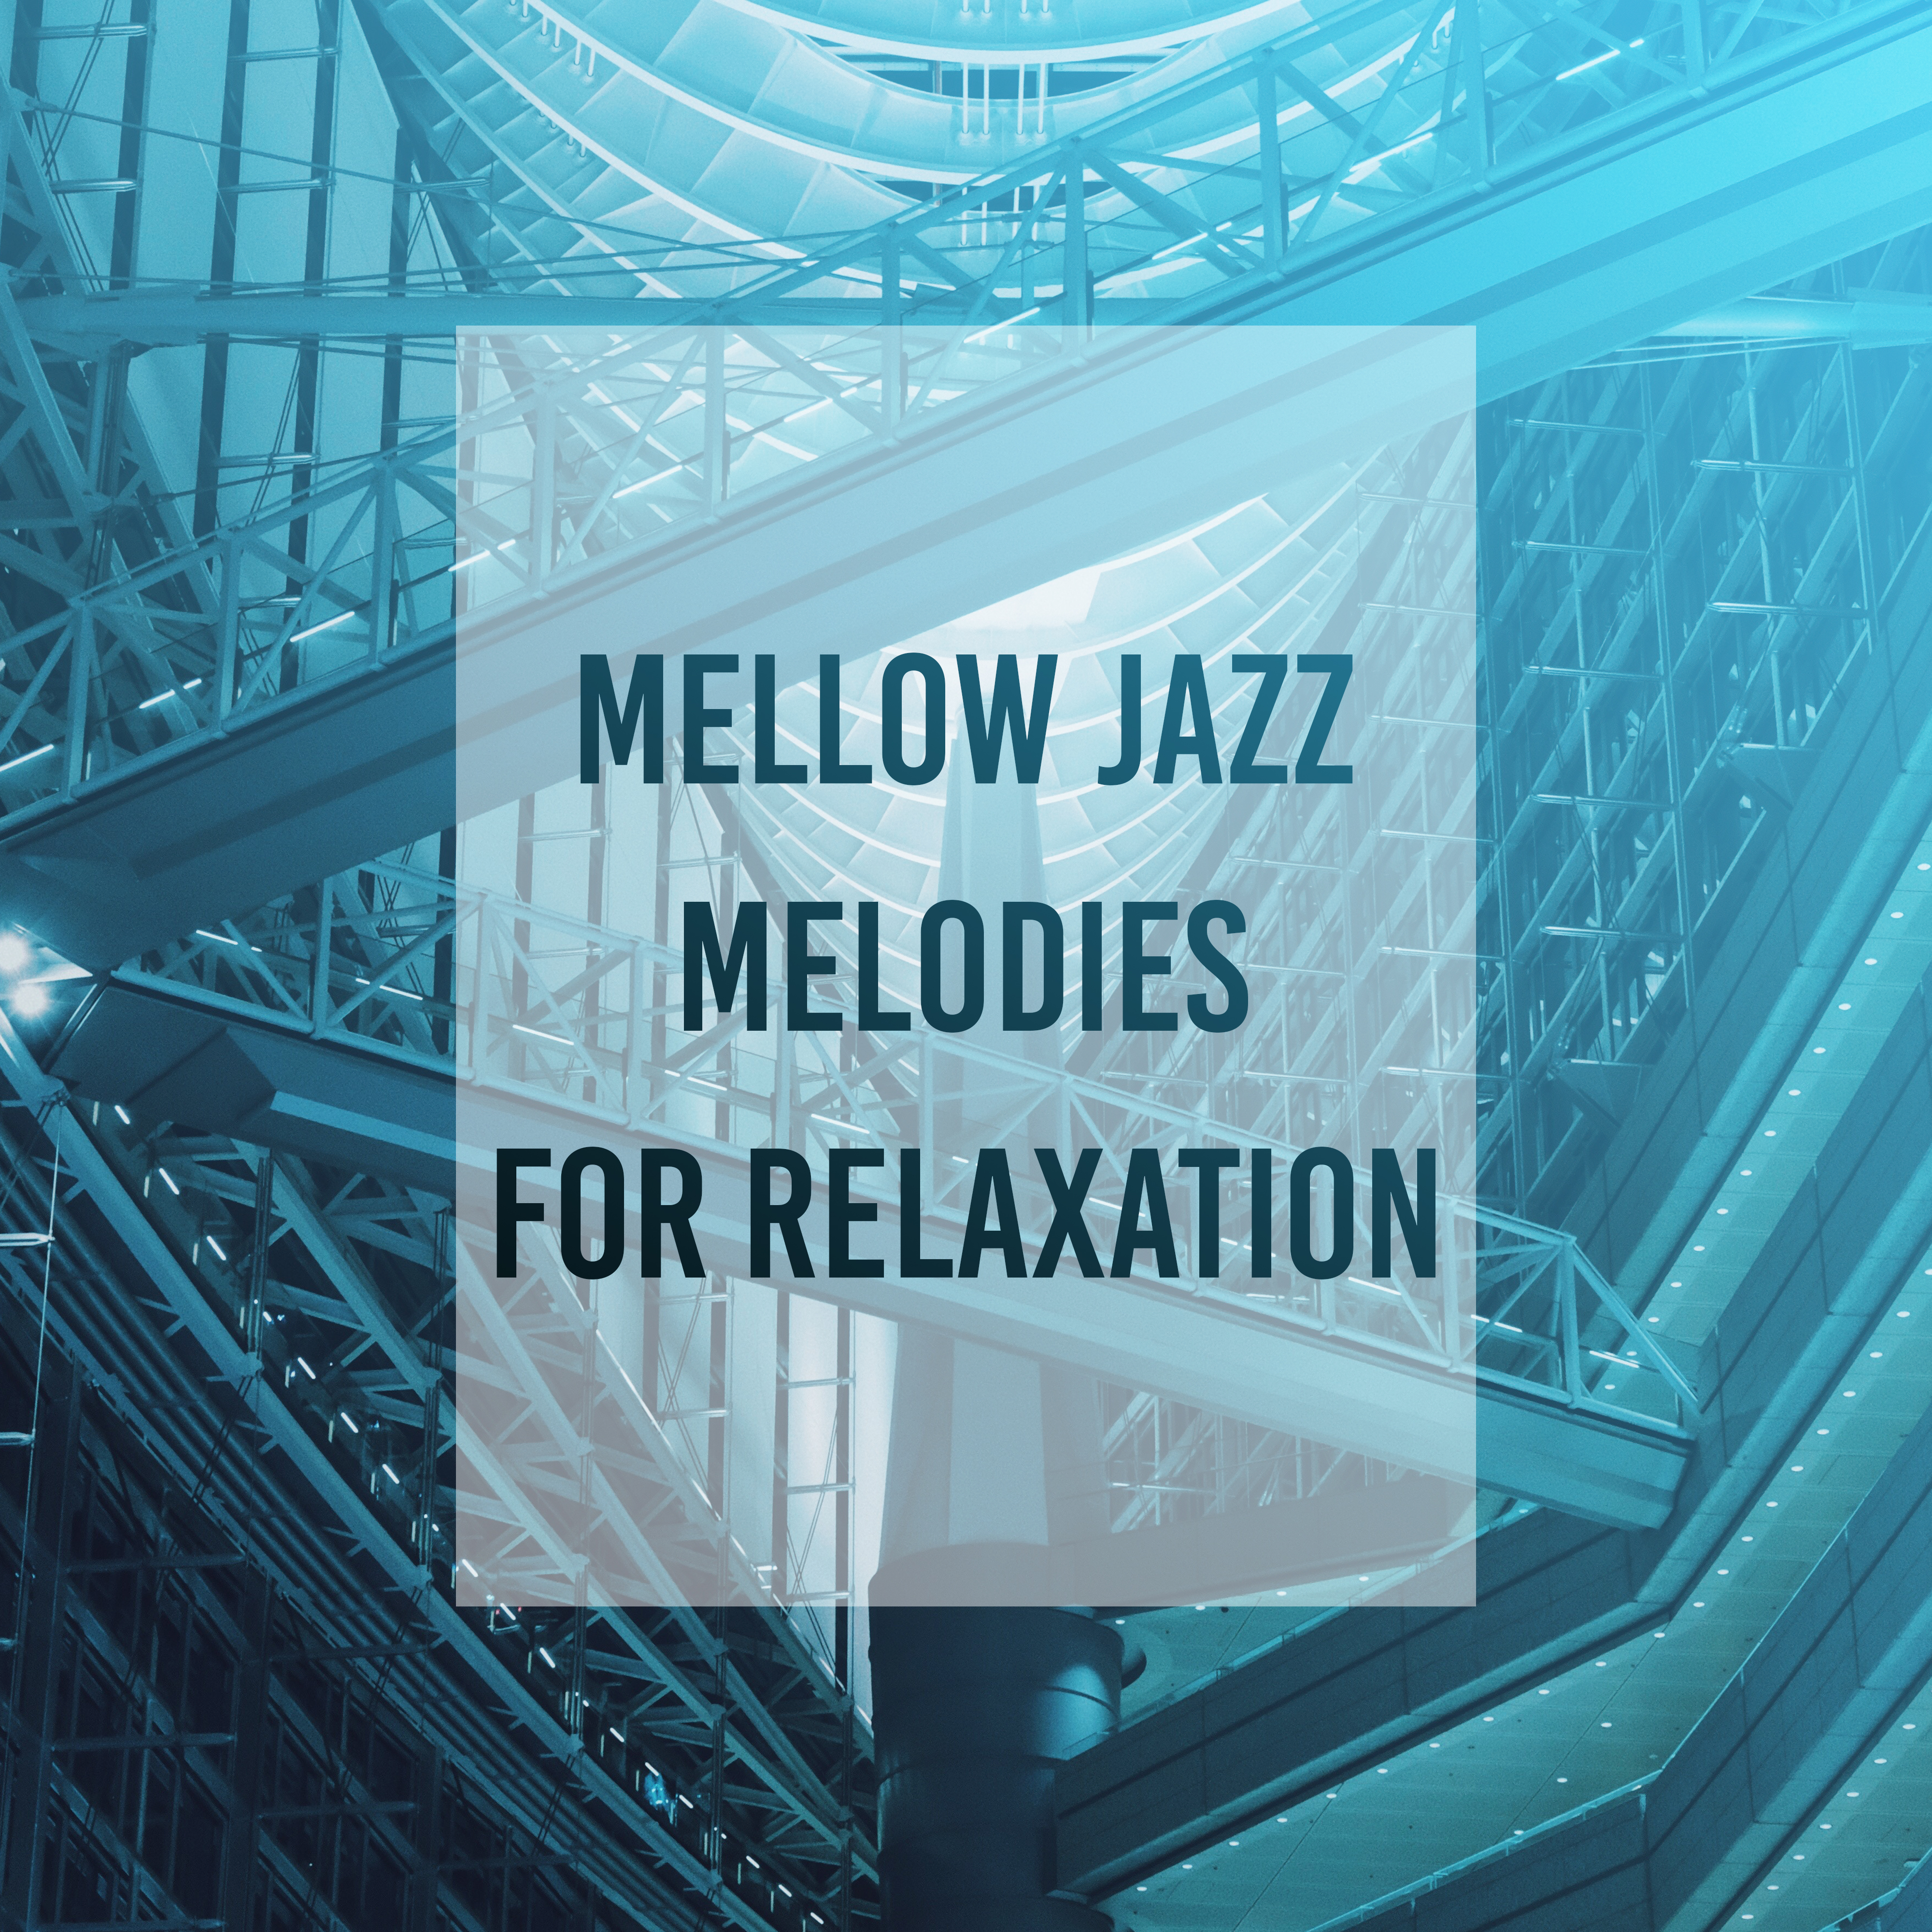 Mellow Jazz Melodies for Relaxation